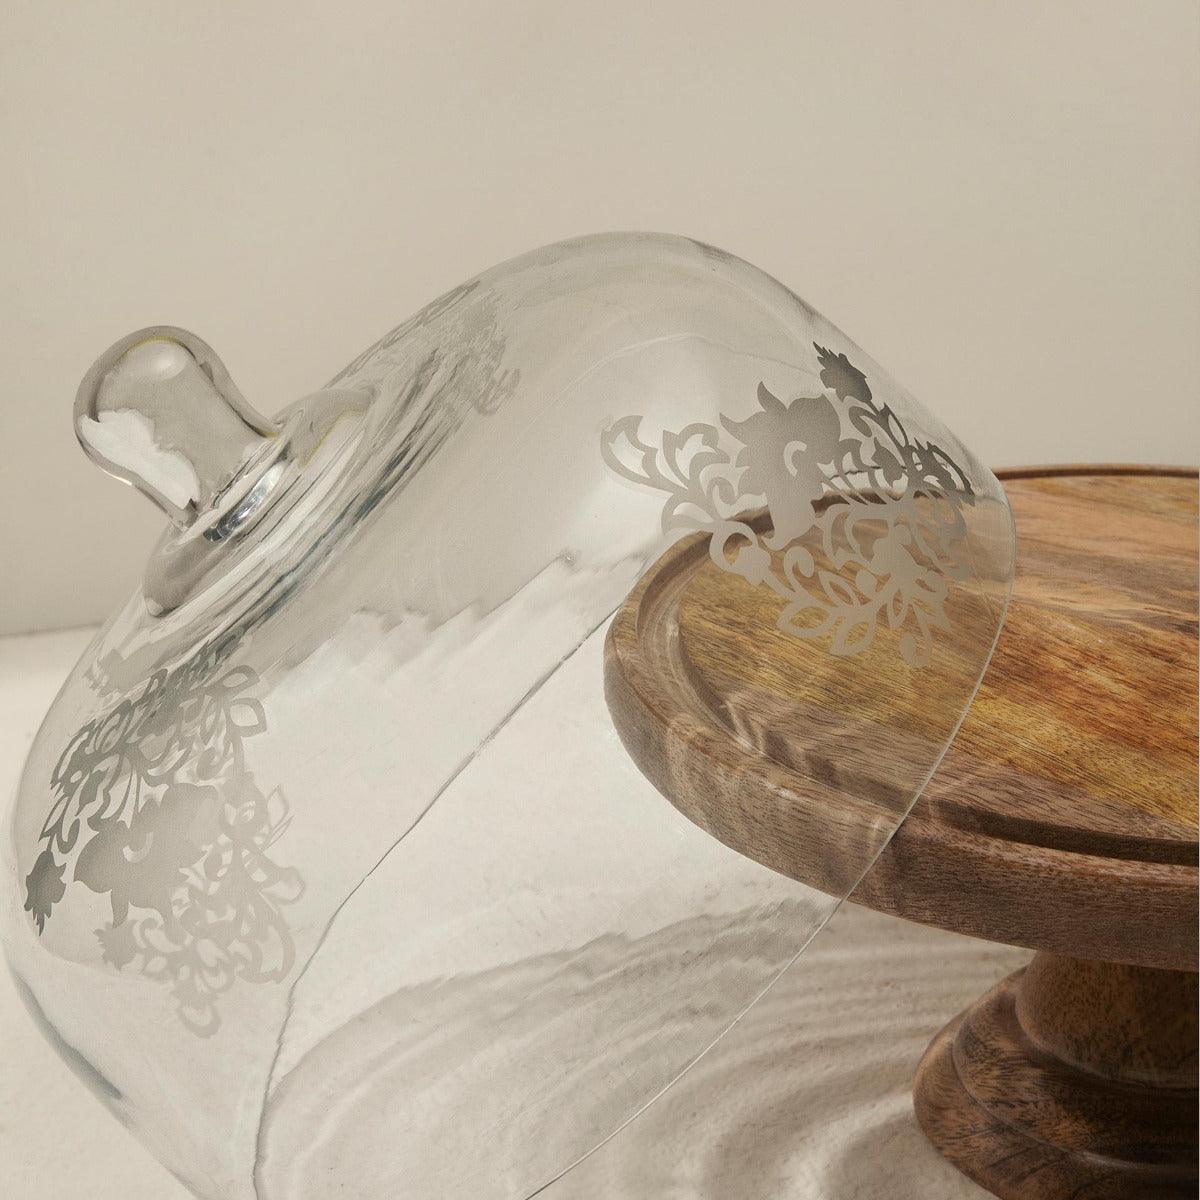 Upper Crust Glass Cloche With Wooden Base